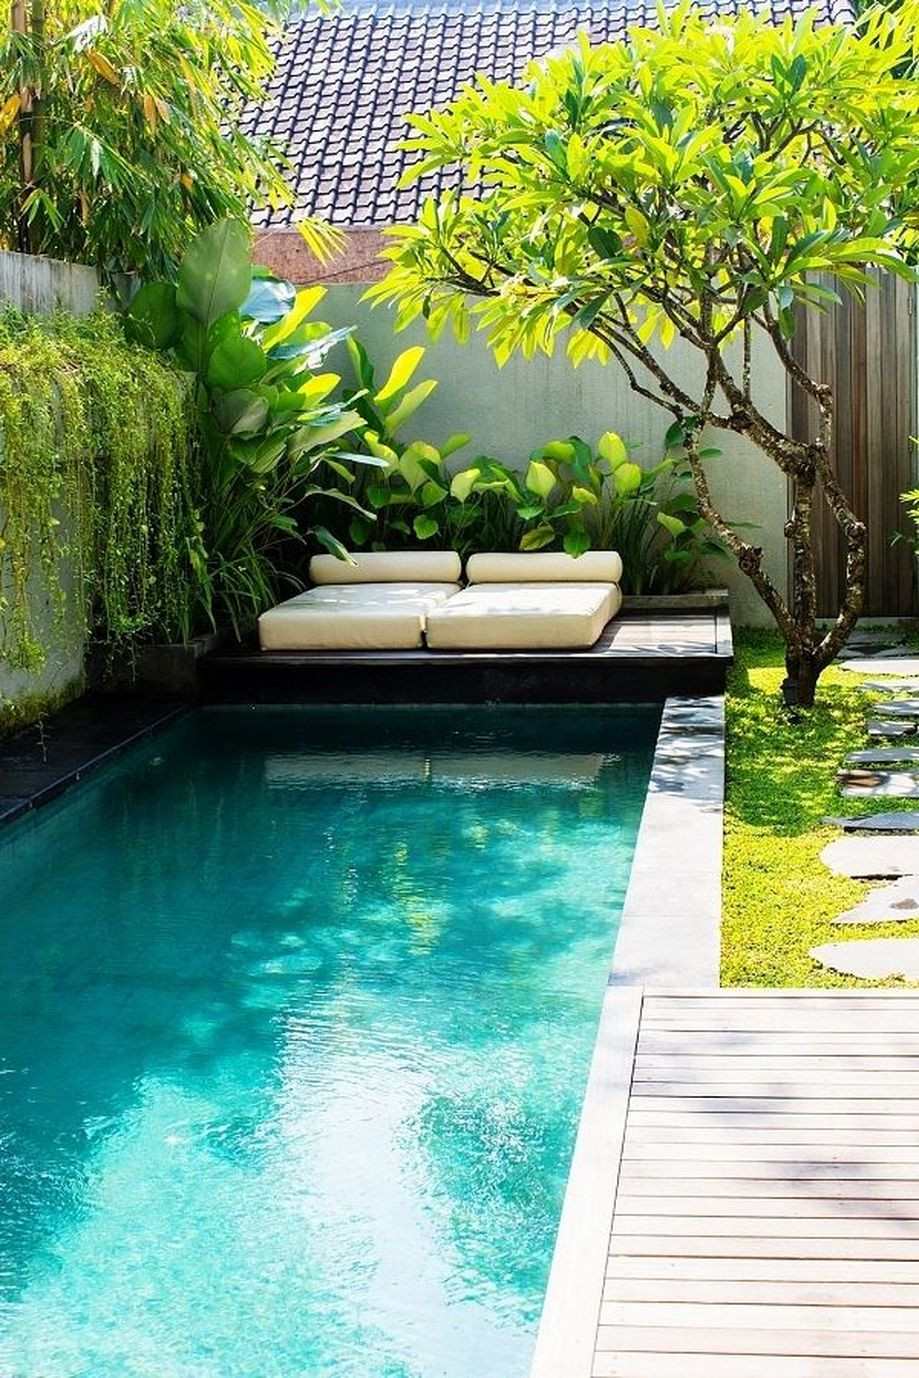 Pools For Small Backyard
 Awesome Small Pool Design for Home Backyard 40 Hoommy